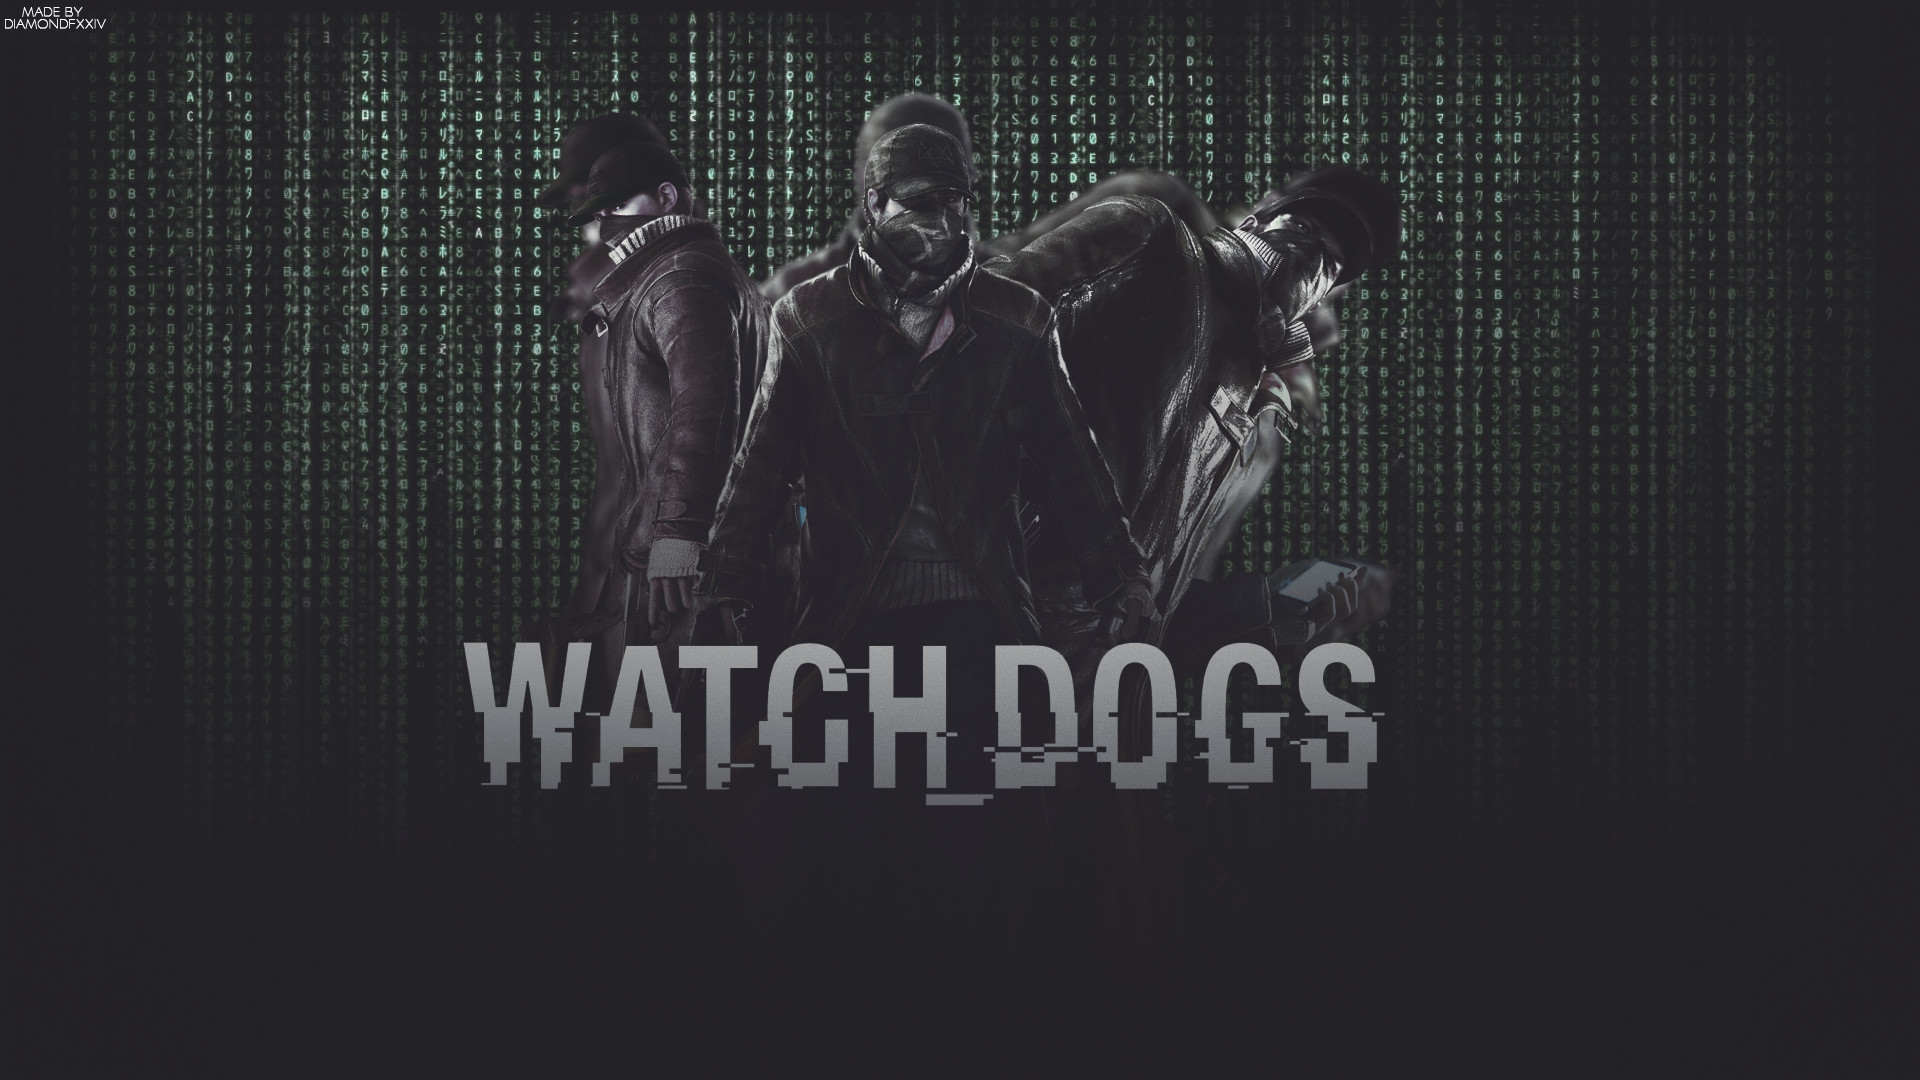 Watch Dogs Wallpaper Image